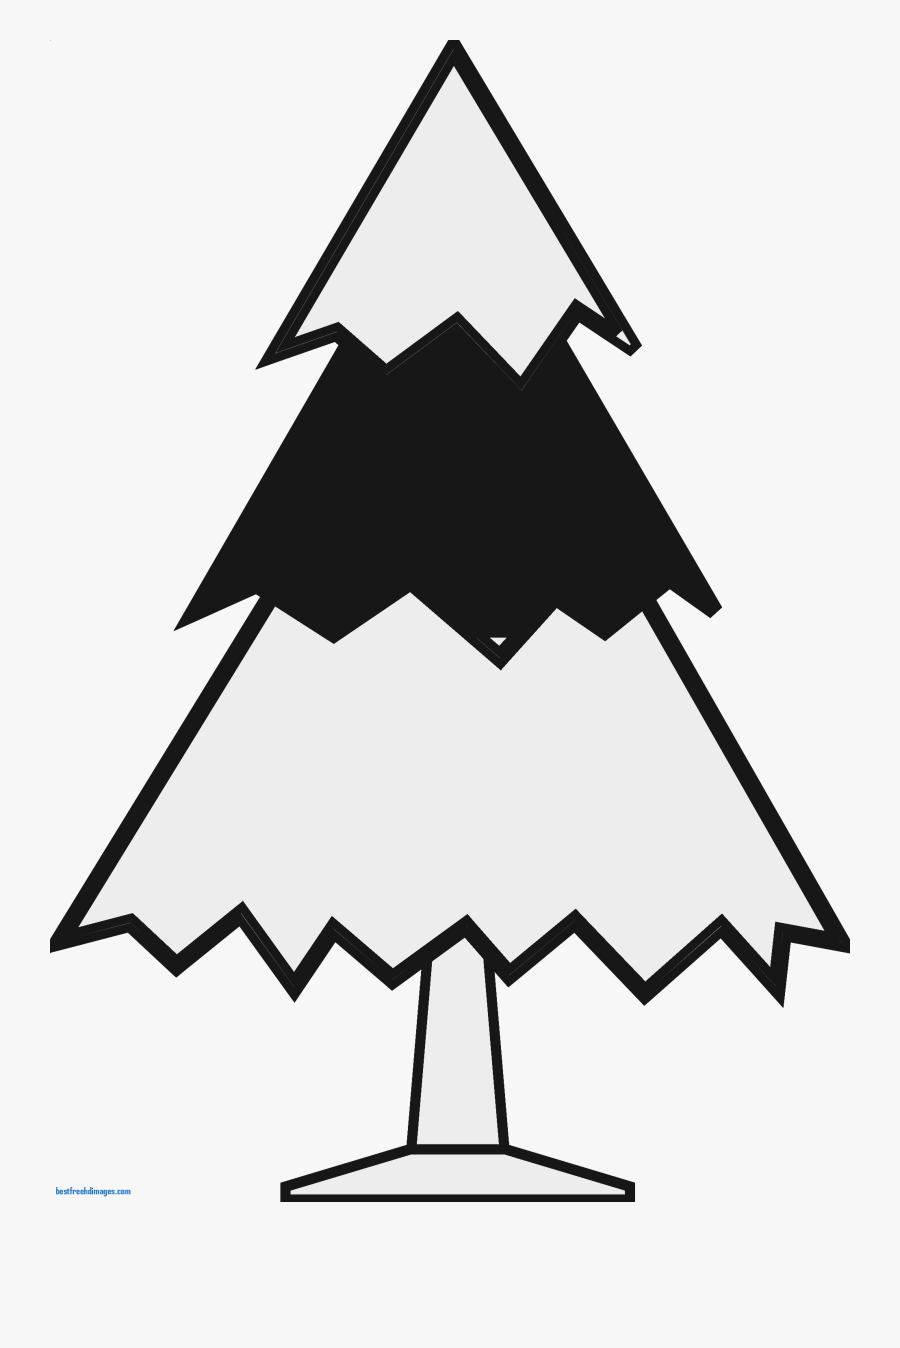 Spectacular Boy Dog Christmas Tree Clip Art Black And - Christmas Tree Clipart Drawing, Transparent Clipart